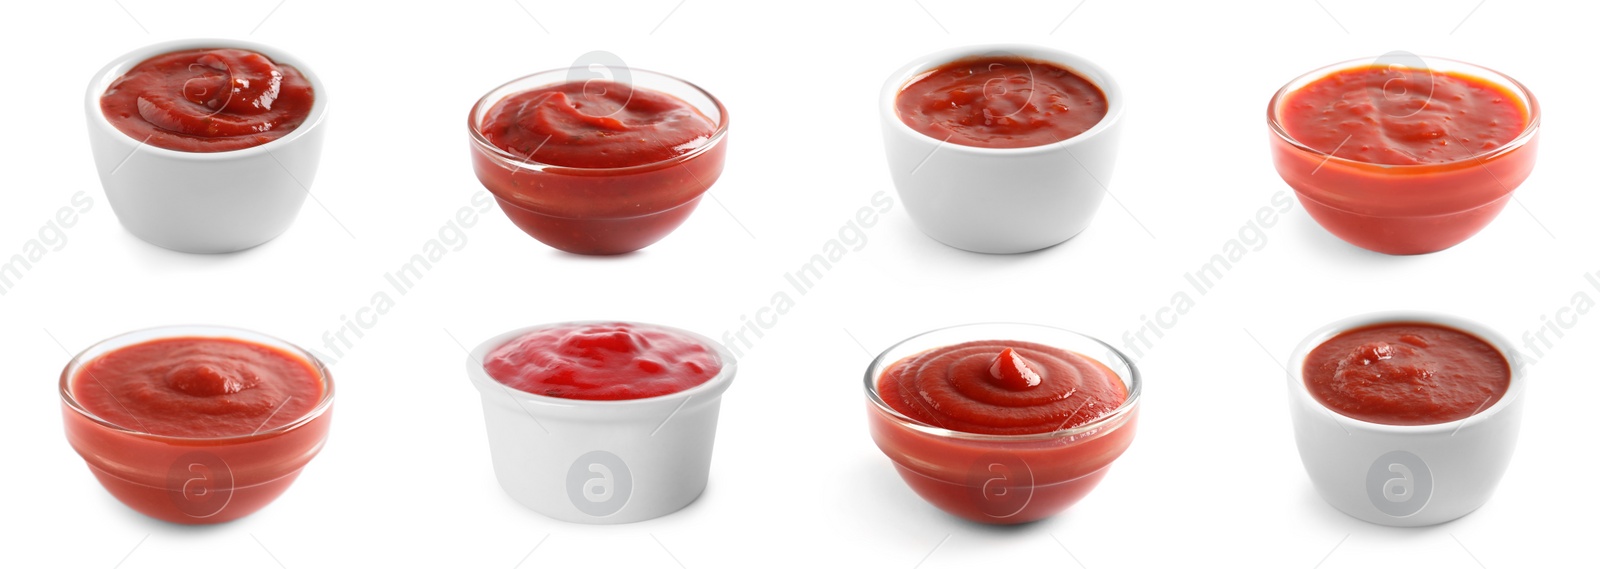 Image of Set of tomato sauces in bowls on white background. Banner design